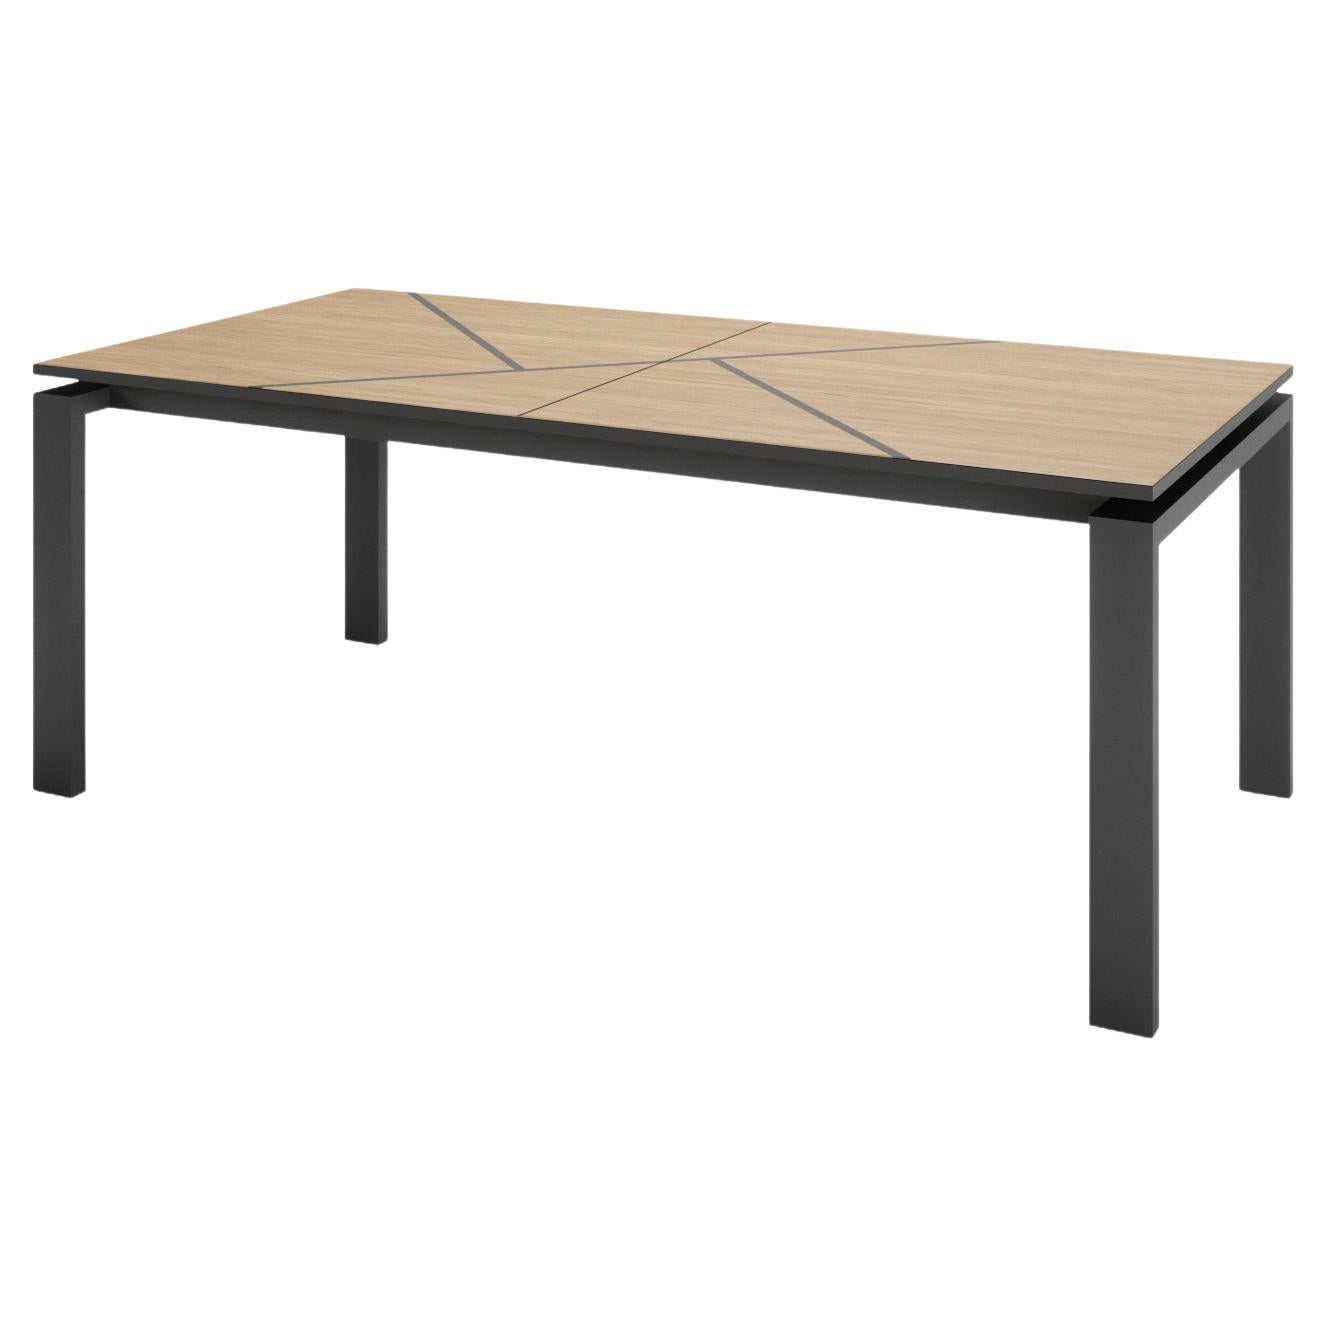 Slide Table Extensions For Sale